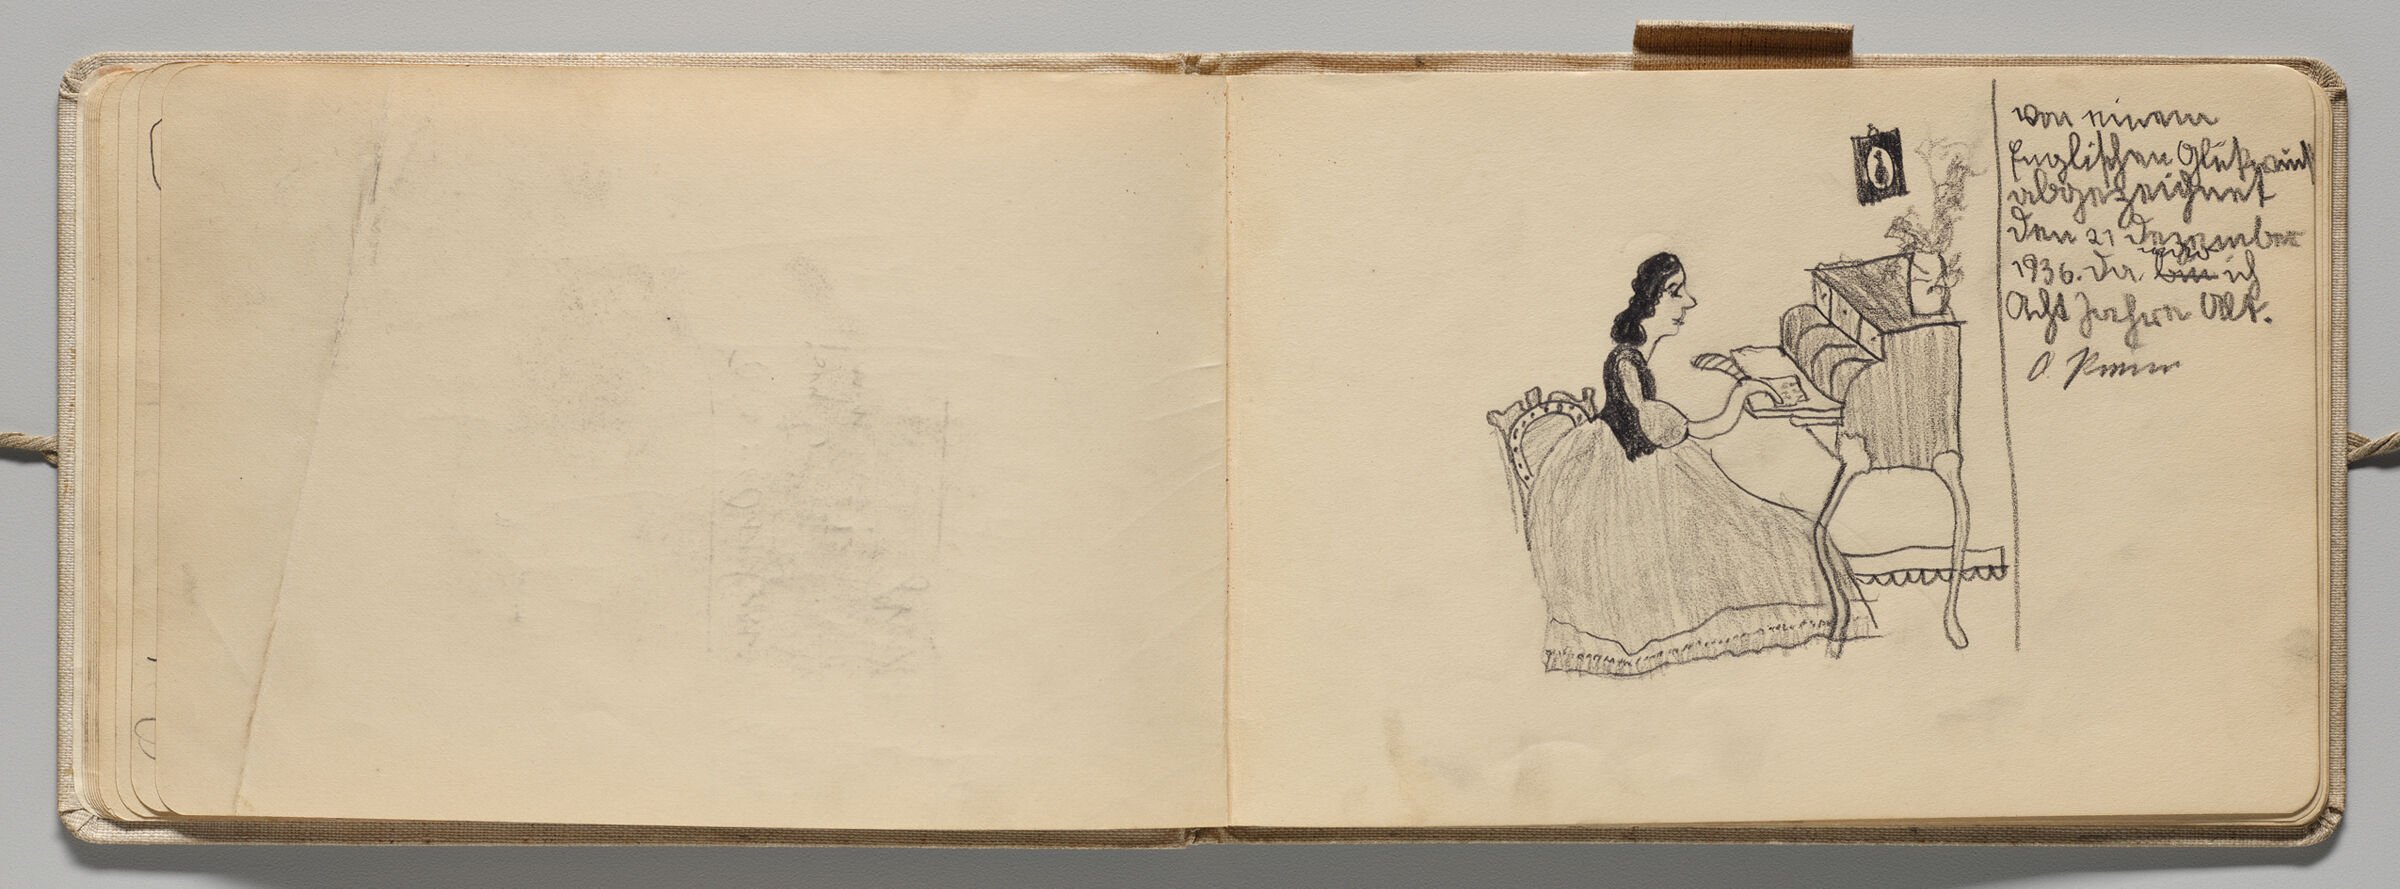 Untitled (Blank, Left Page); Untitled (Seated Female Figure Writing Letter At Desk, Right Page)